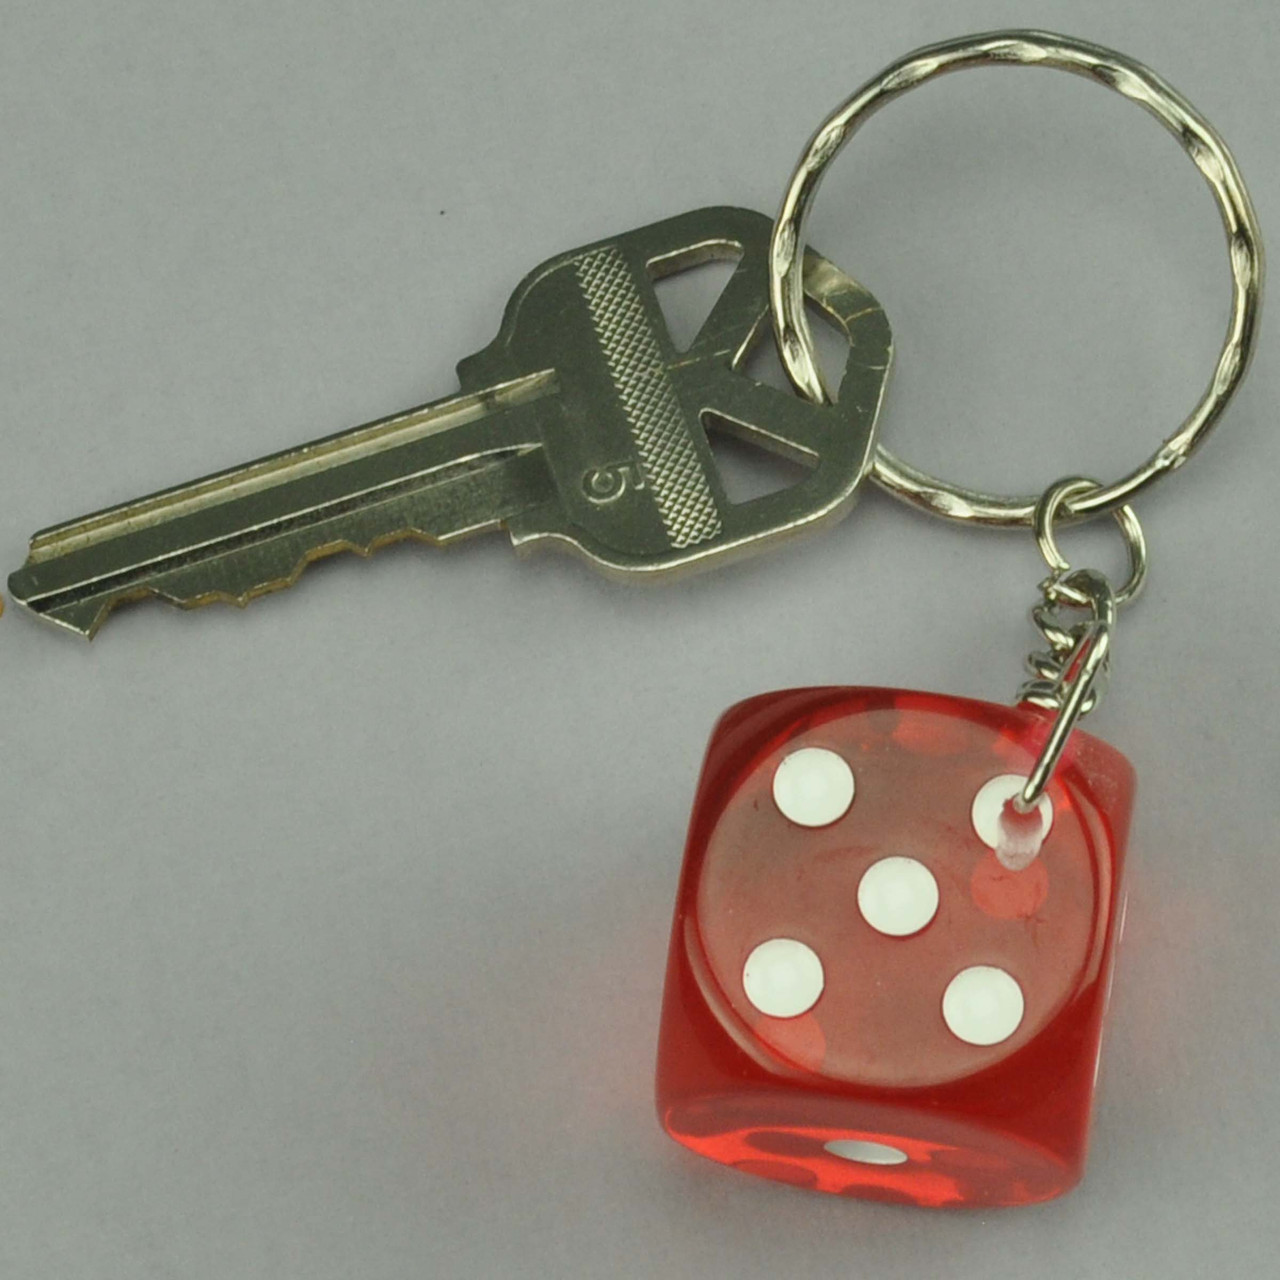 Teensery 2 Pcs Heavy Duty Metal Dice Keychain Solid 6 Sided Keyring Chain  Personalized Gift,20mm